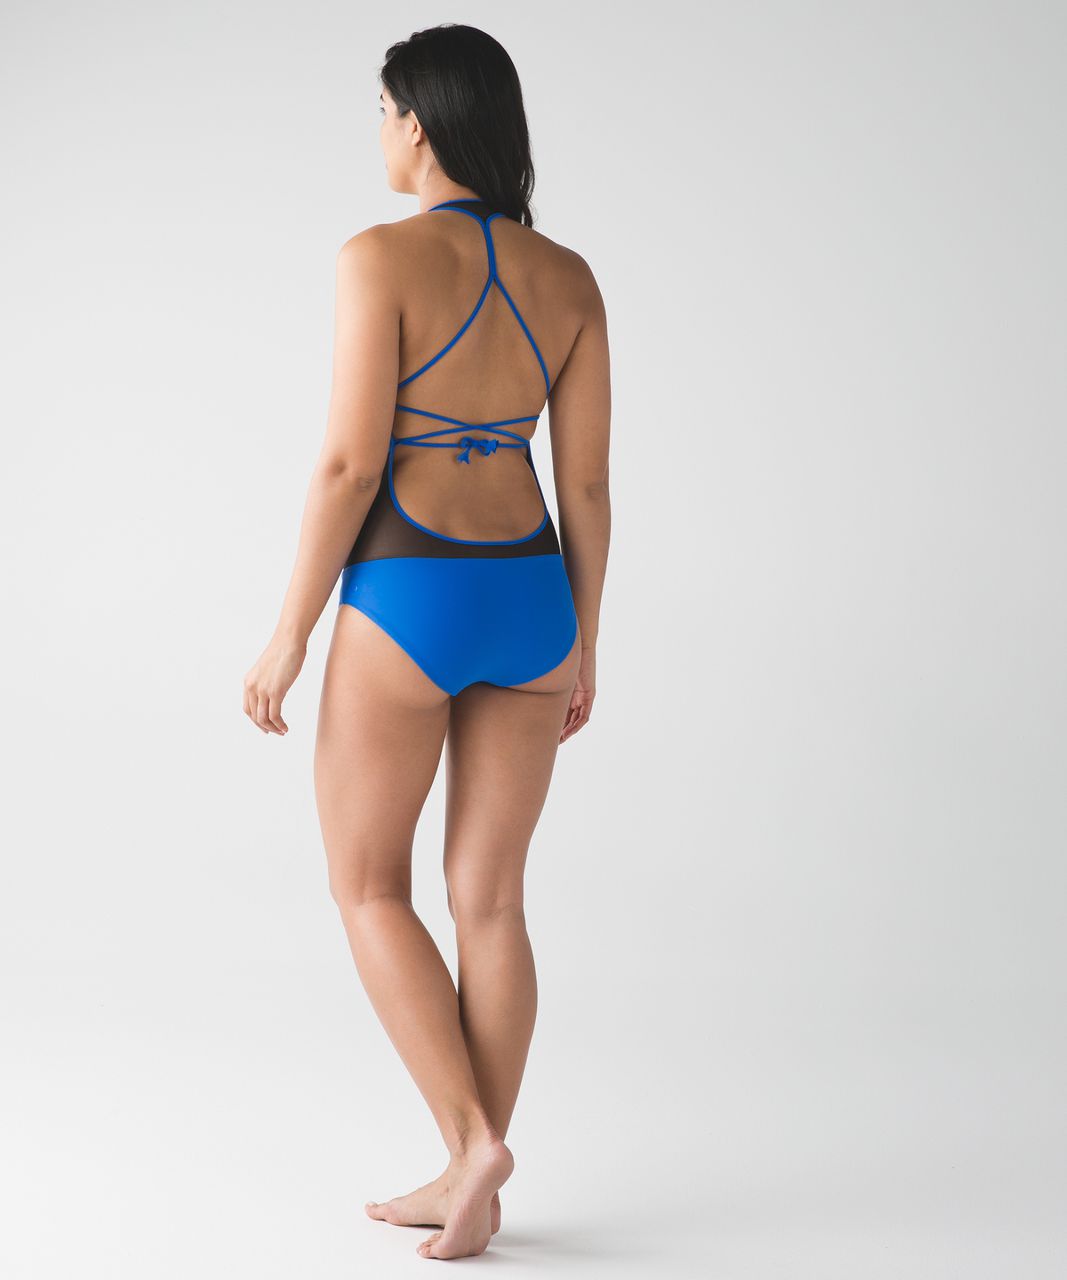 Lululemon Go With The Flow One Piece - Pipe Dream Blue / Black